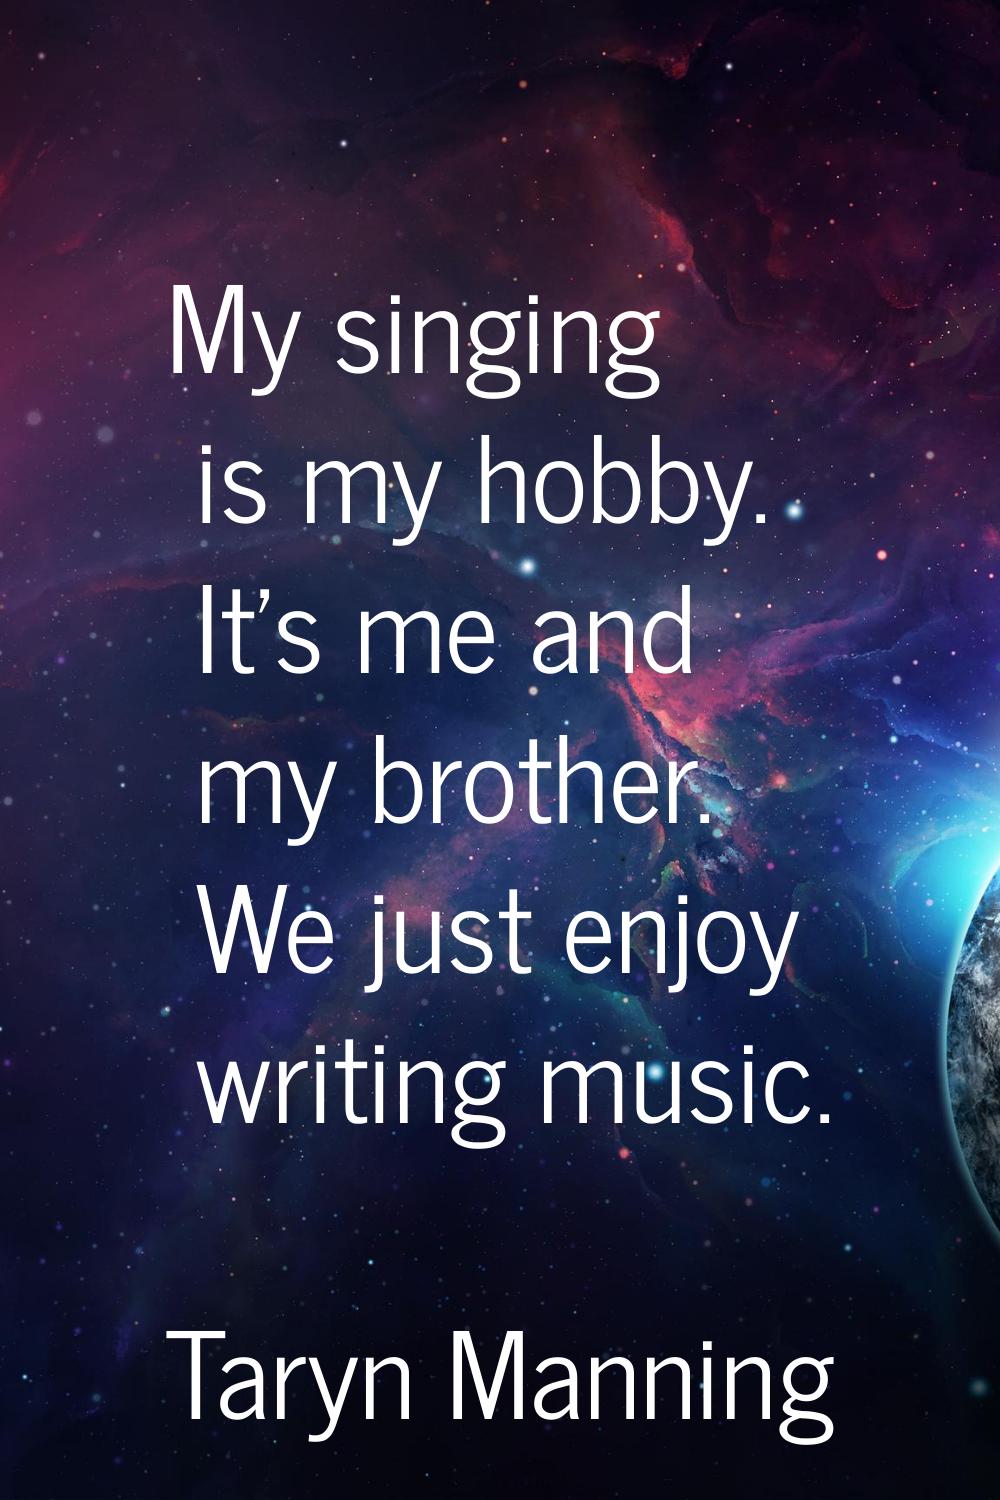 My singing is my hobby. It's me and my brother. We just enjoy writing music.